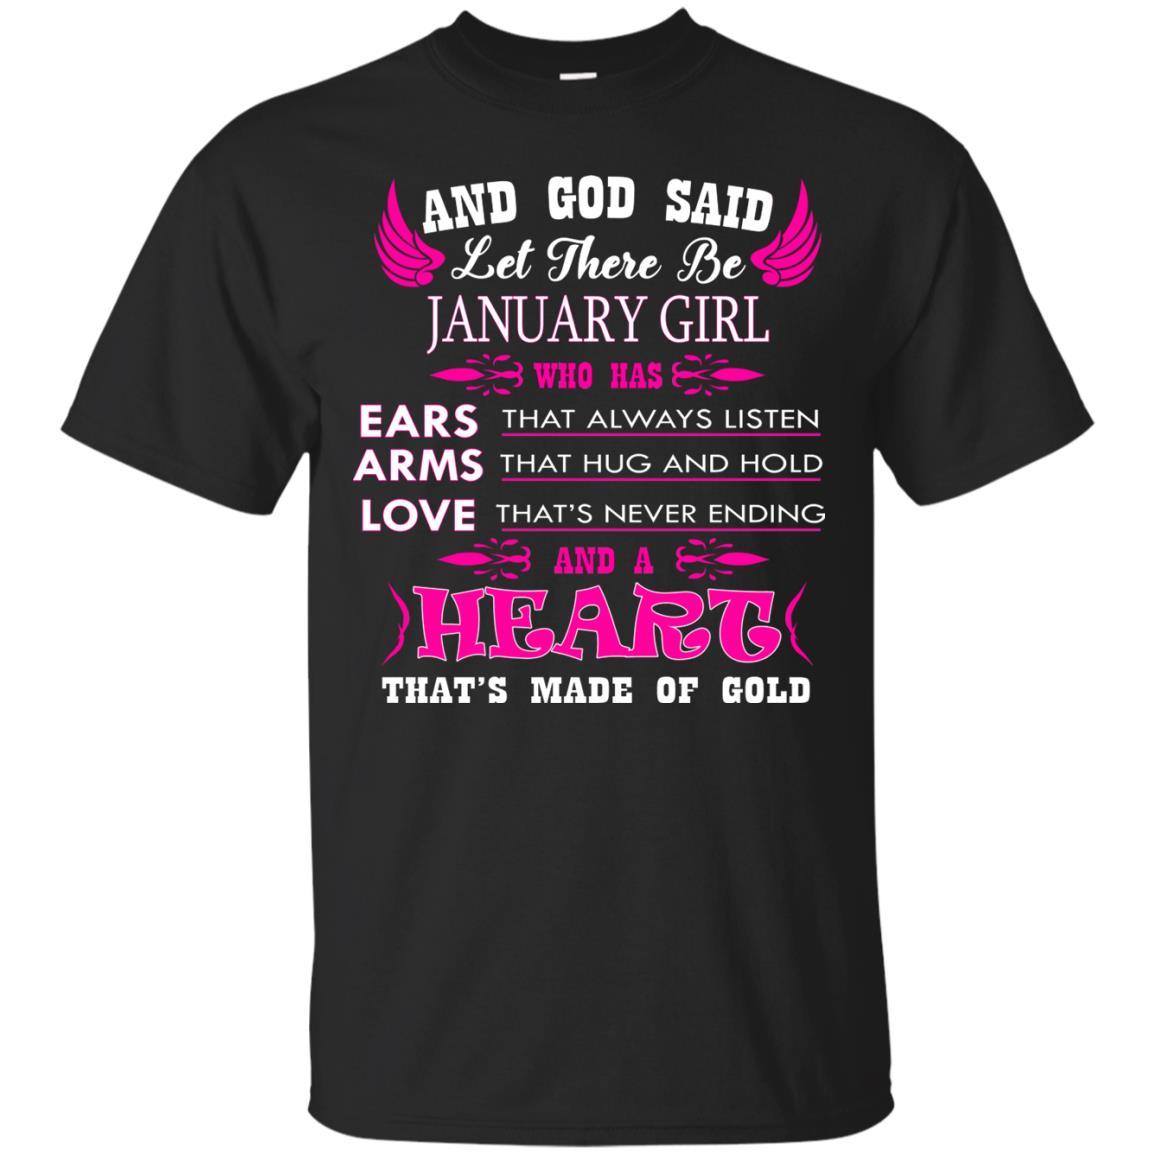 And God Said Let There Be January Girl Who Has Ears - Arms - Love Shirt